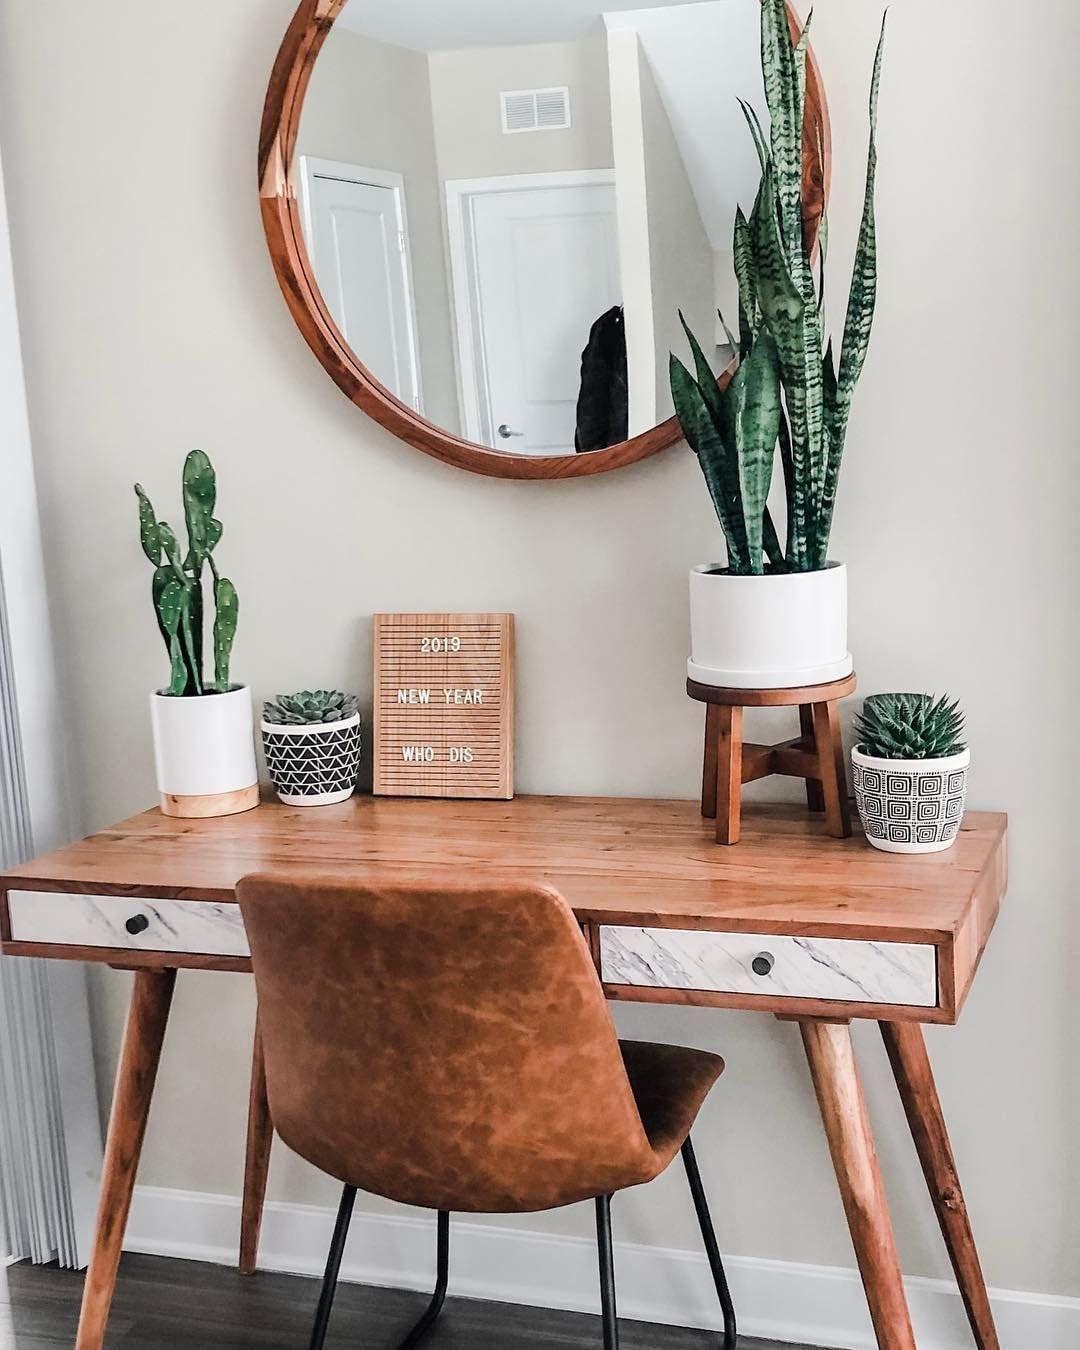 HomeGoods on Instagram: “Let’s get down to business! Chelsea and Chloe, from @onedreamtwosisters, found a sleek wooden desk with marble accents at their HomeGoods.…”